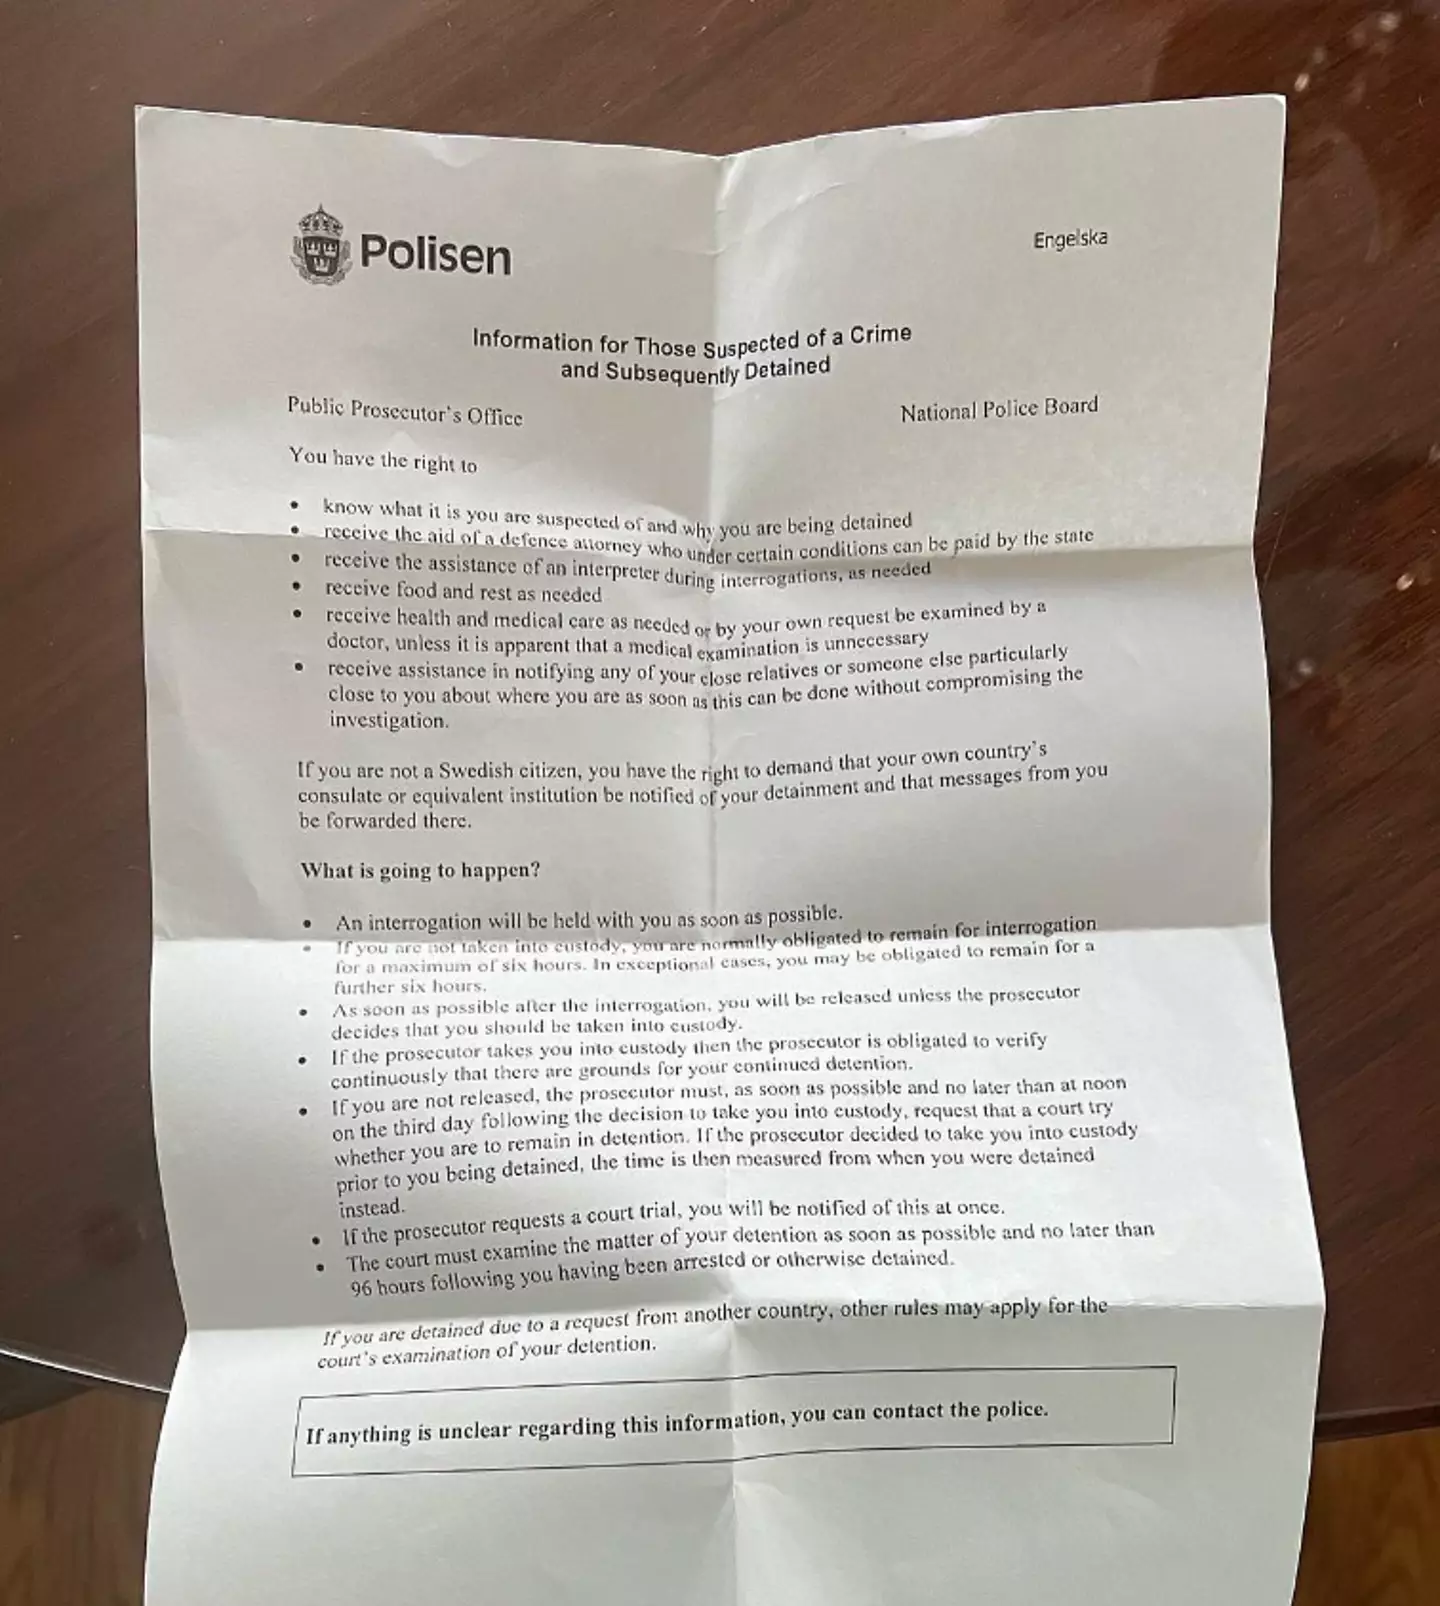 The post included what looks to be an arrest warrant from Swedish authorities.